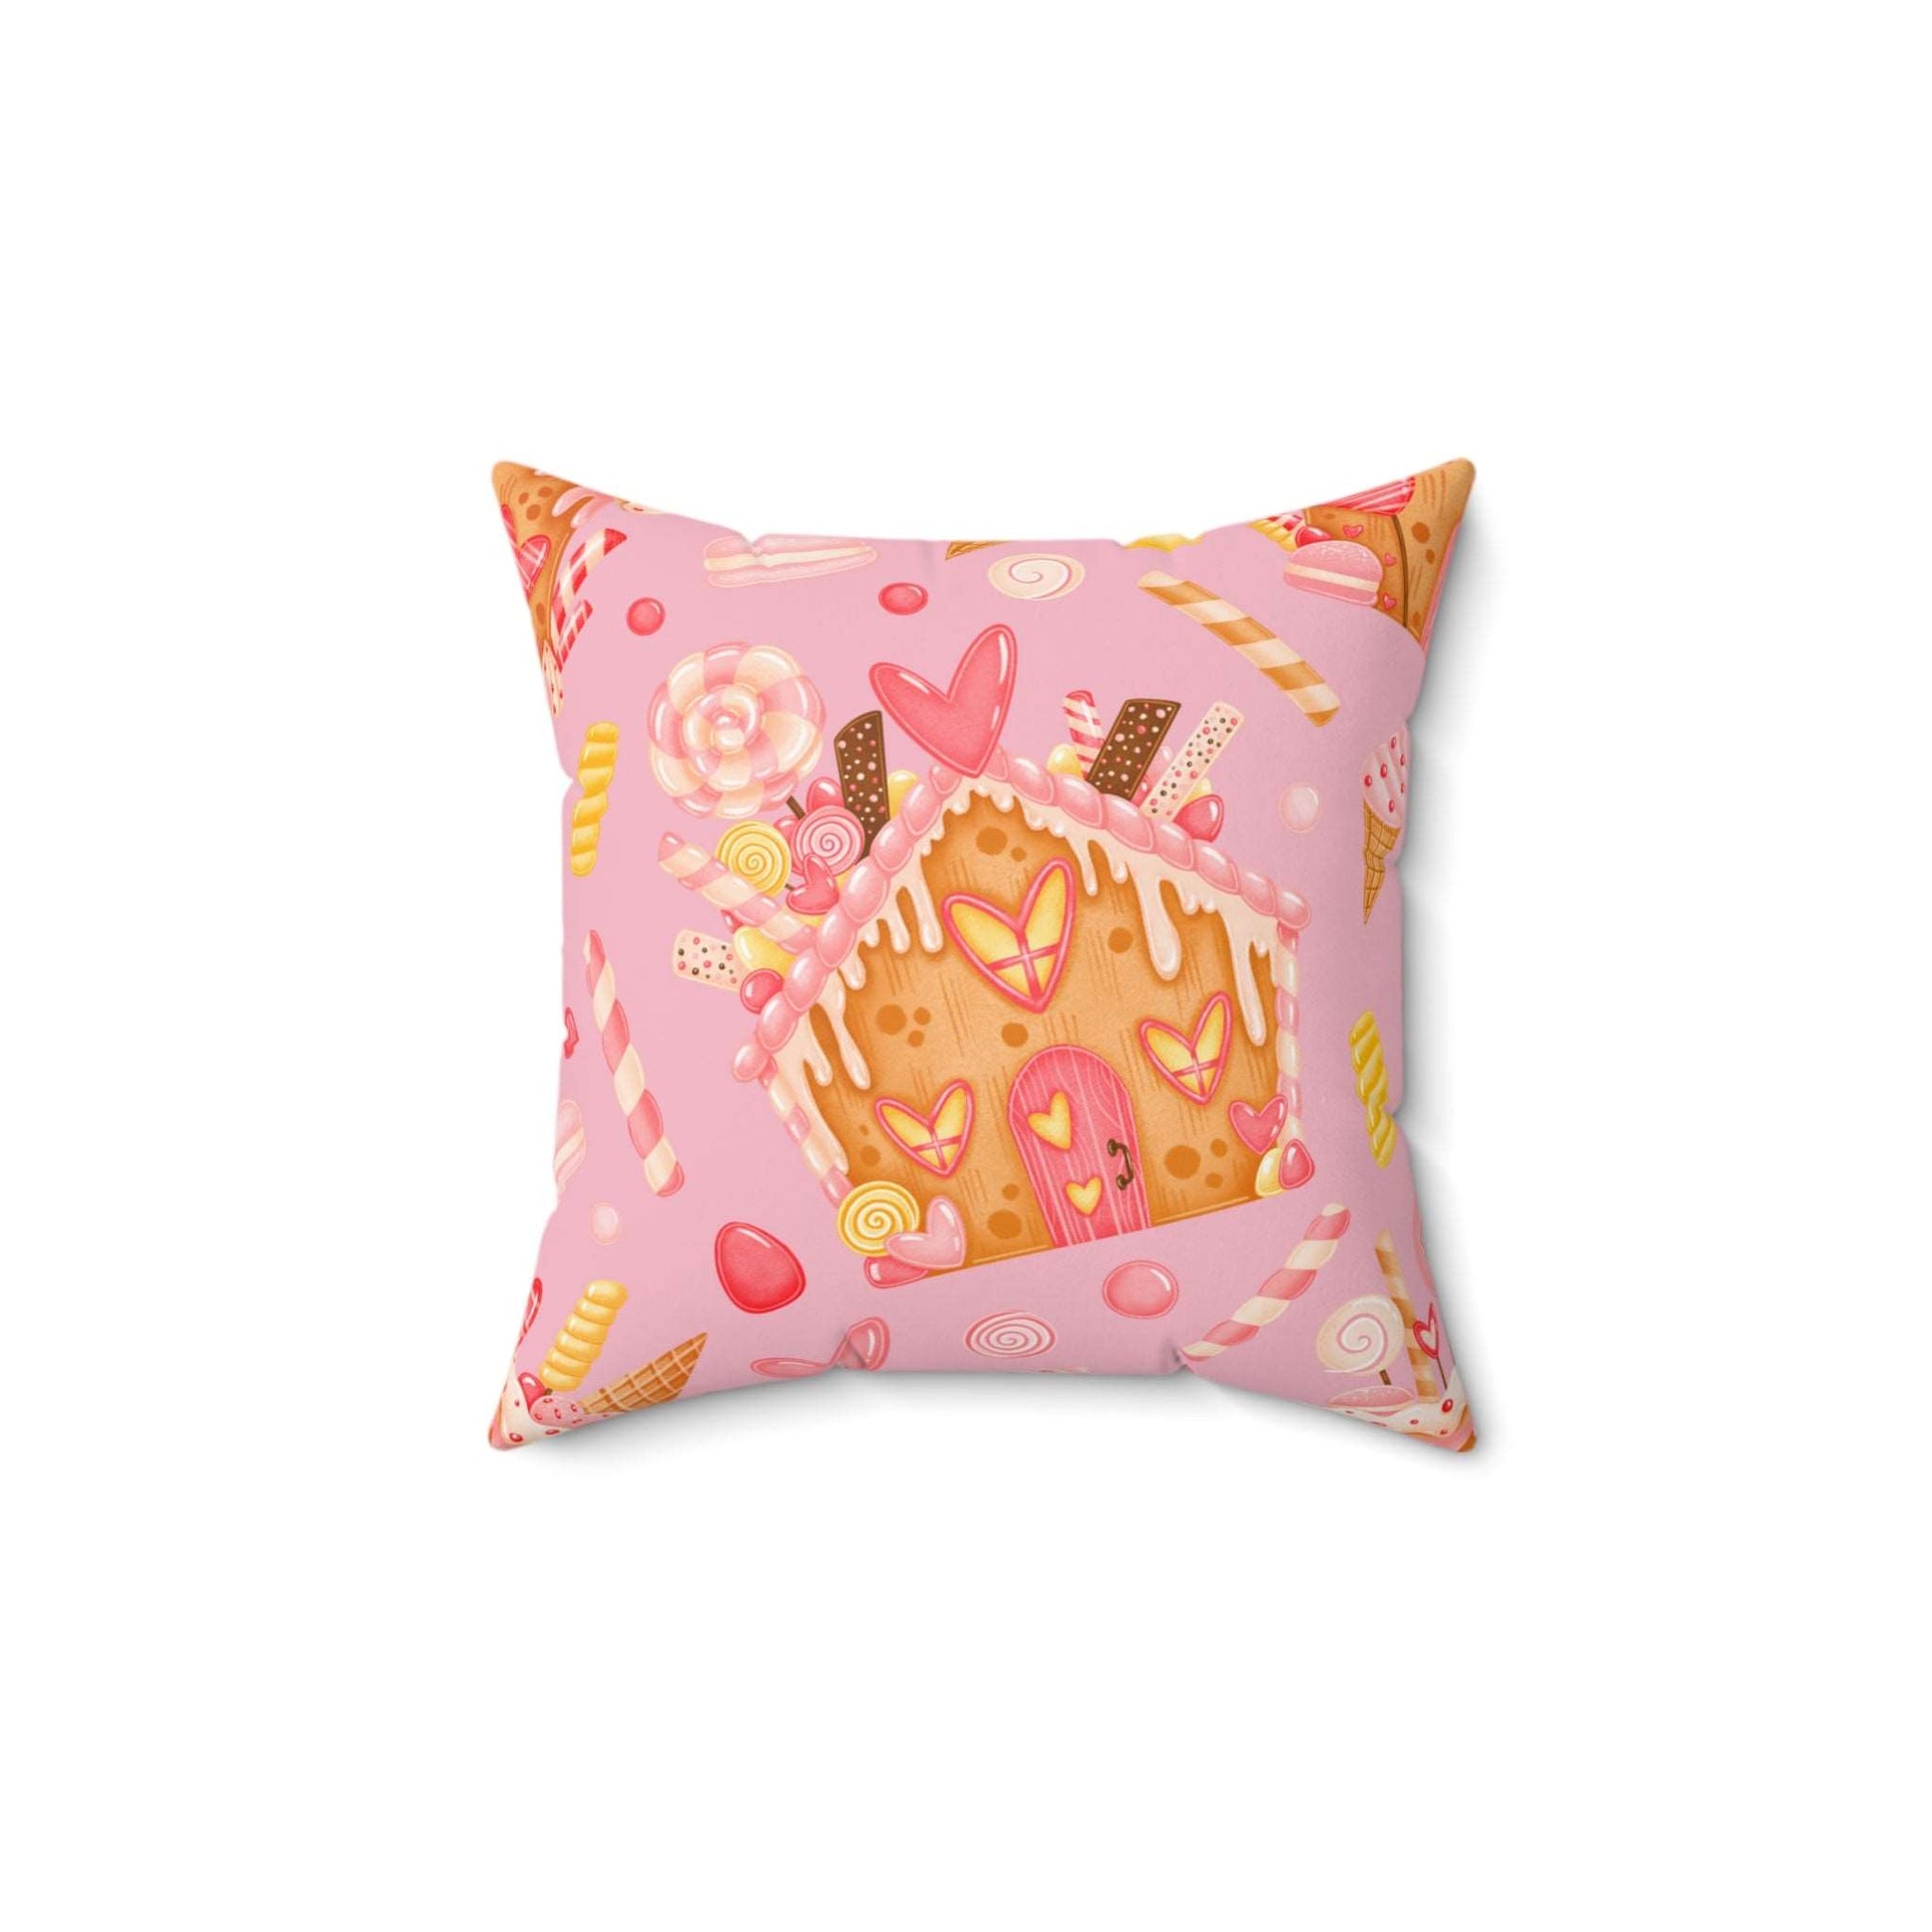 Big Gingerbread House Square Pillow